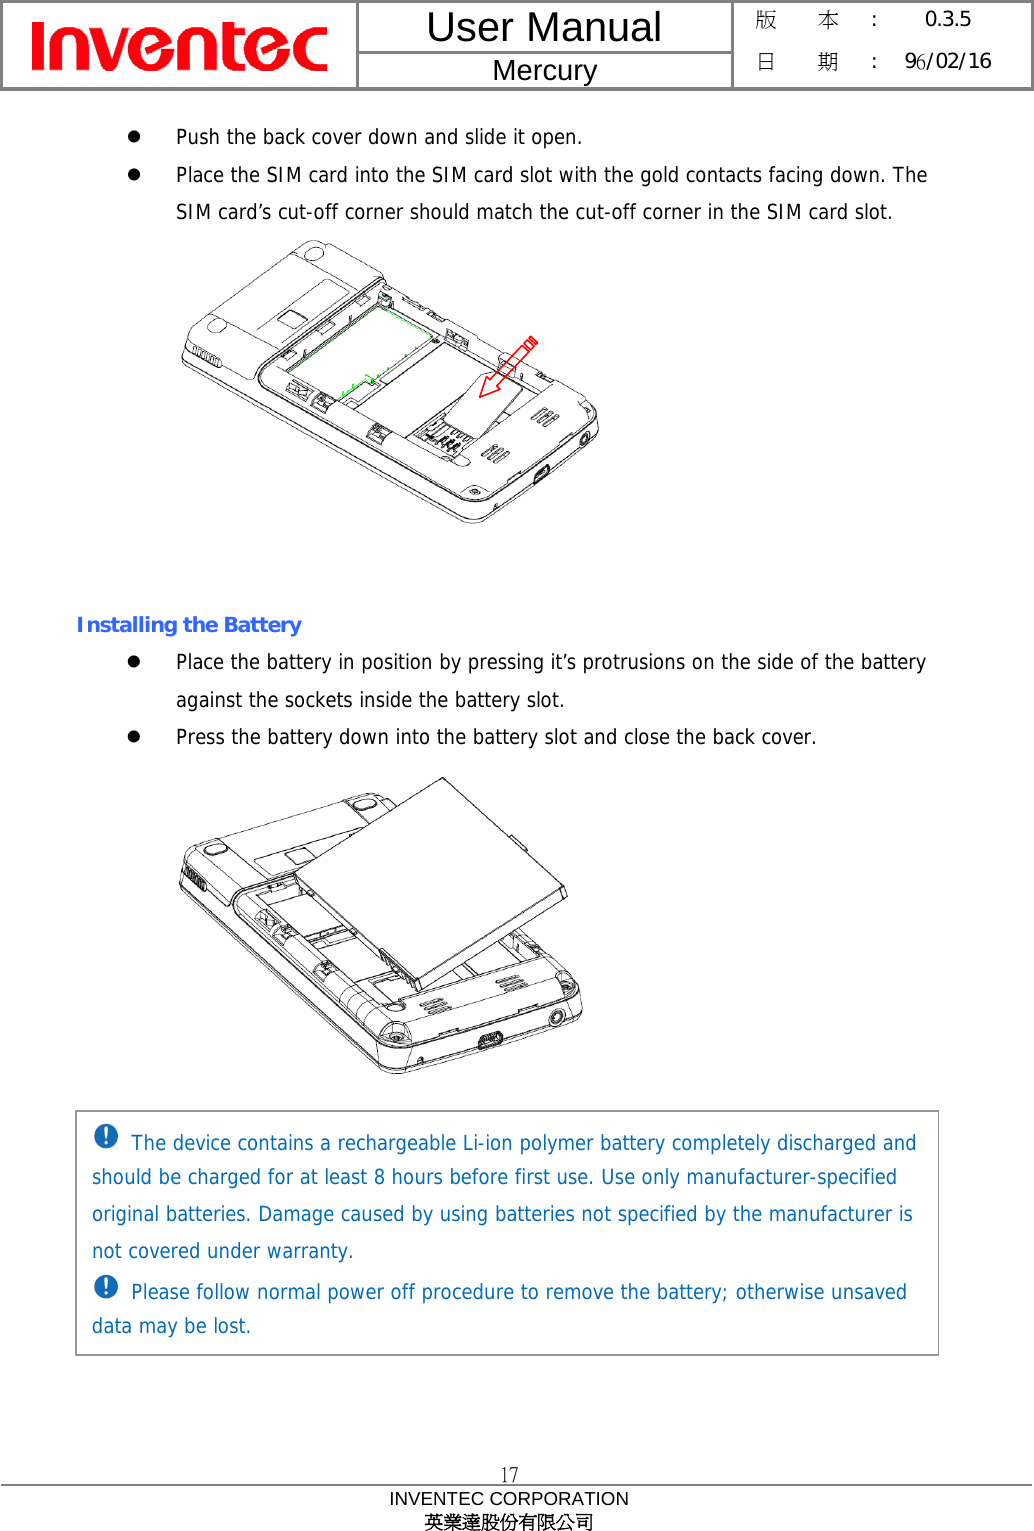 User Manual  Mercury 版    本 :  0.3.5 日    期 : 96/02/16  17 INVENTEC CORPORATION 英業達股份有限公司  z Push the back cover down and slide it open. z Place the SIM card into the SIM card slot with the gold contacts facing down. The SIM card’s cut-off corner should match the cut-off corner in the SIM card slot.    Installing the Battery z Place the battery in position by pressing it’s protrusions on the side of the battery against the sockets inside the battery slot. z Press the battery down into the battery slot and close the back cover.             The device contains a rechargeable Li-ion polymer battery completely discharged and should be charged for at least 8 hours before first use. Use only manufacturer-specified original batteries. Damage caused by using batteries not specified by the manufacturer is not covered under warranty.  Please follow normal power off procedure to remove the battery; otherwise unsaved data may be lost. 